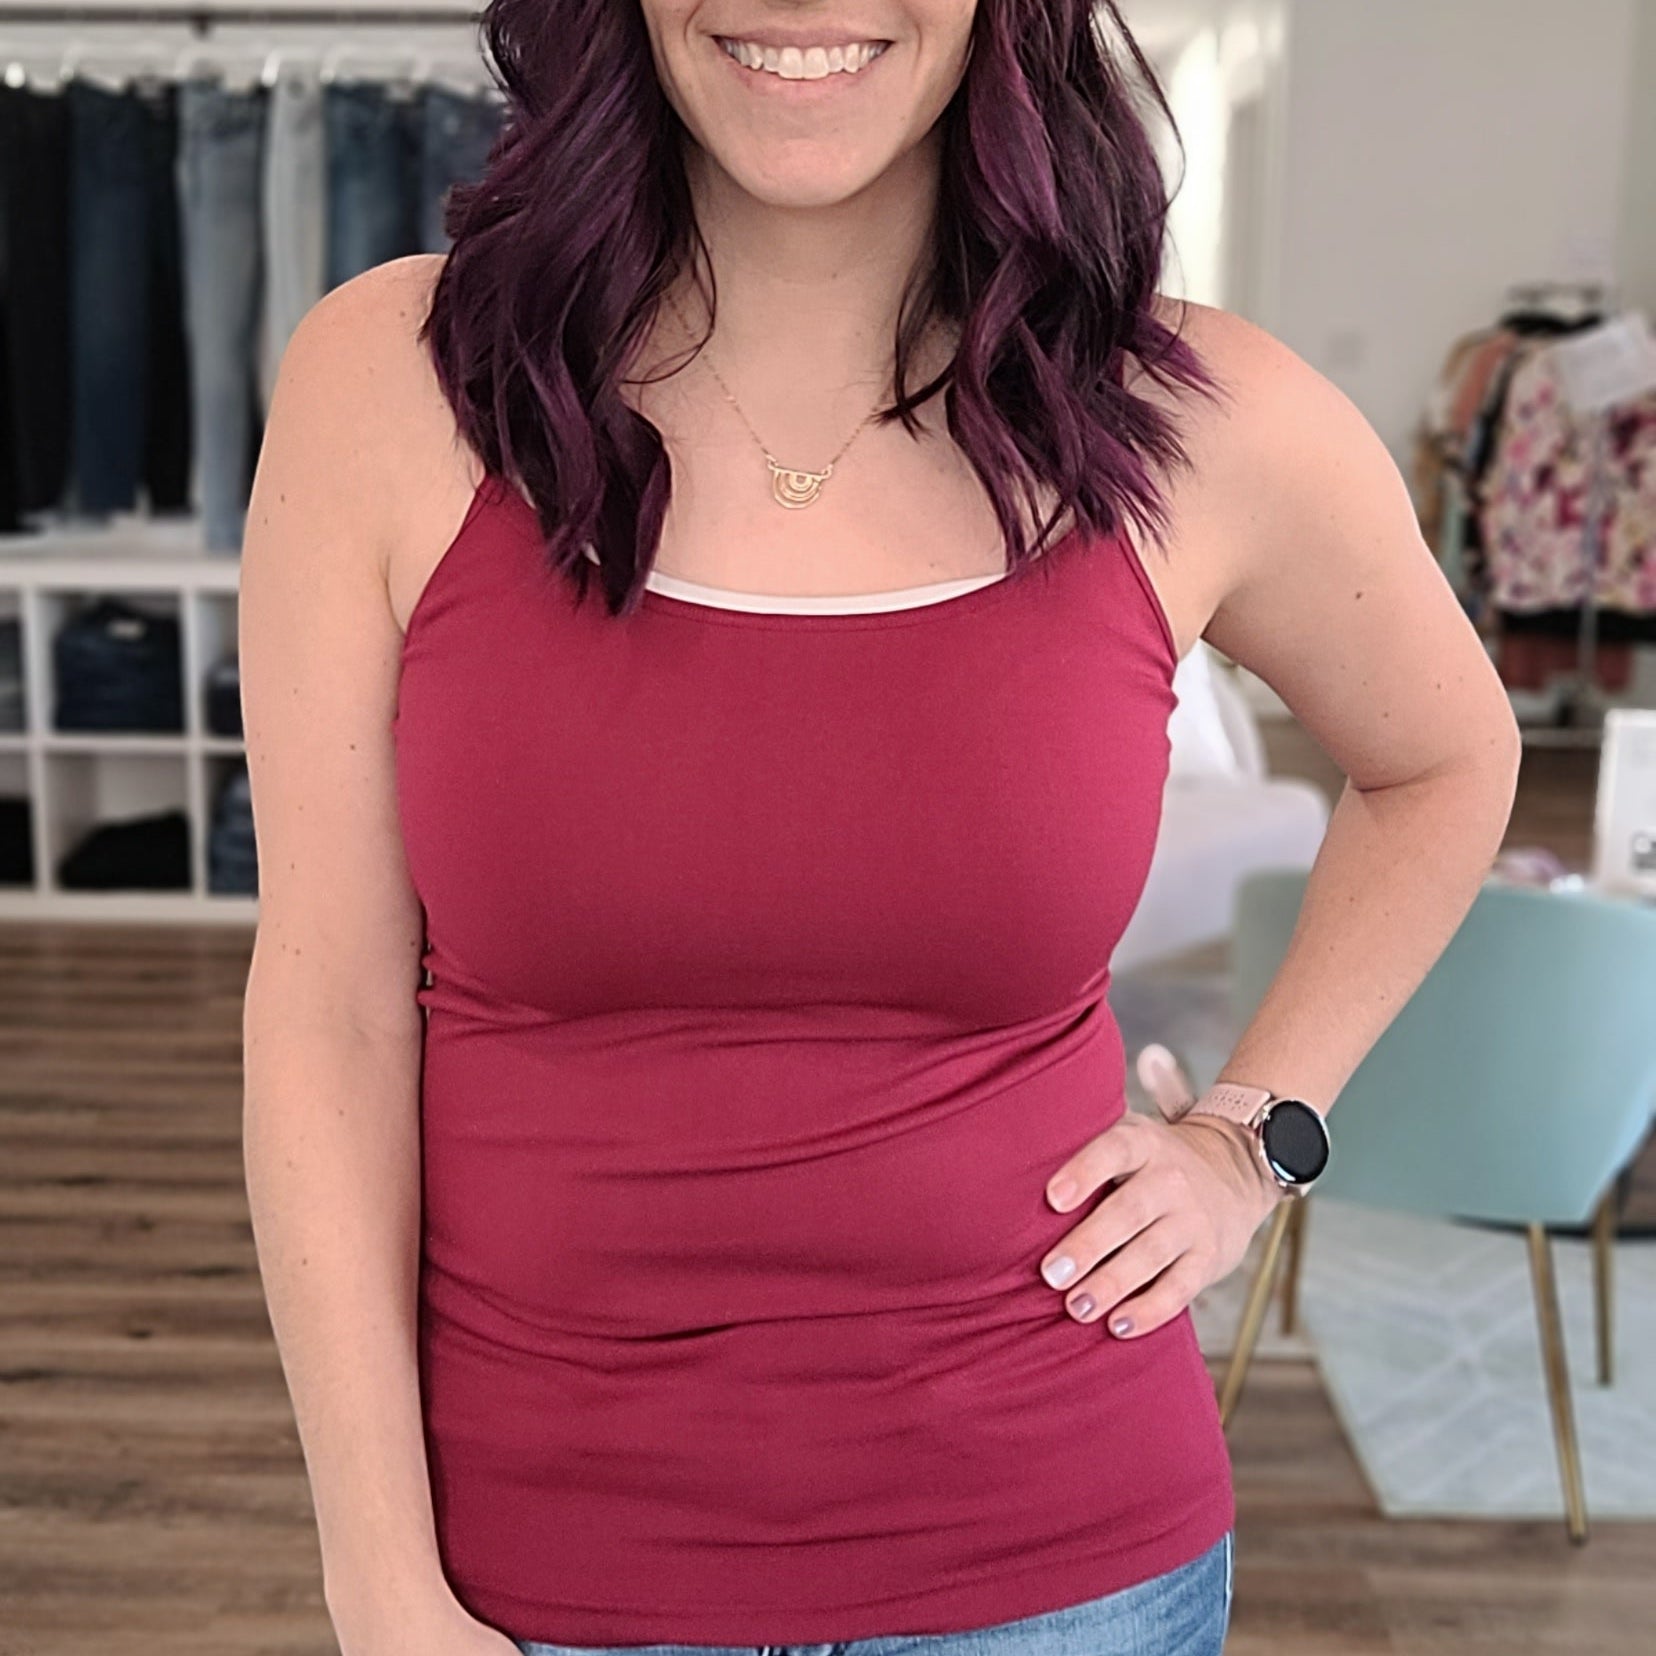 Shop Everyday Camisole with Adjustable Straps-Basics at Ruby Joy Boutique, a Women's Clothing Store in Pickerington, Ohio